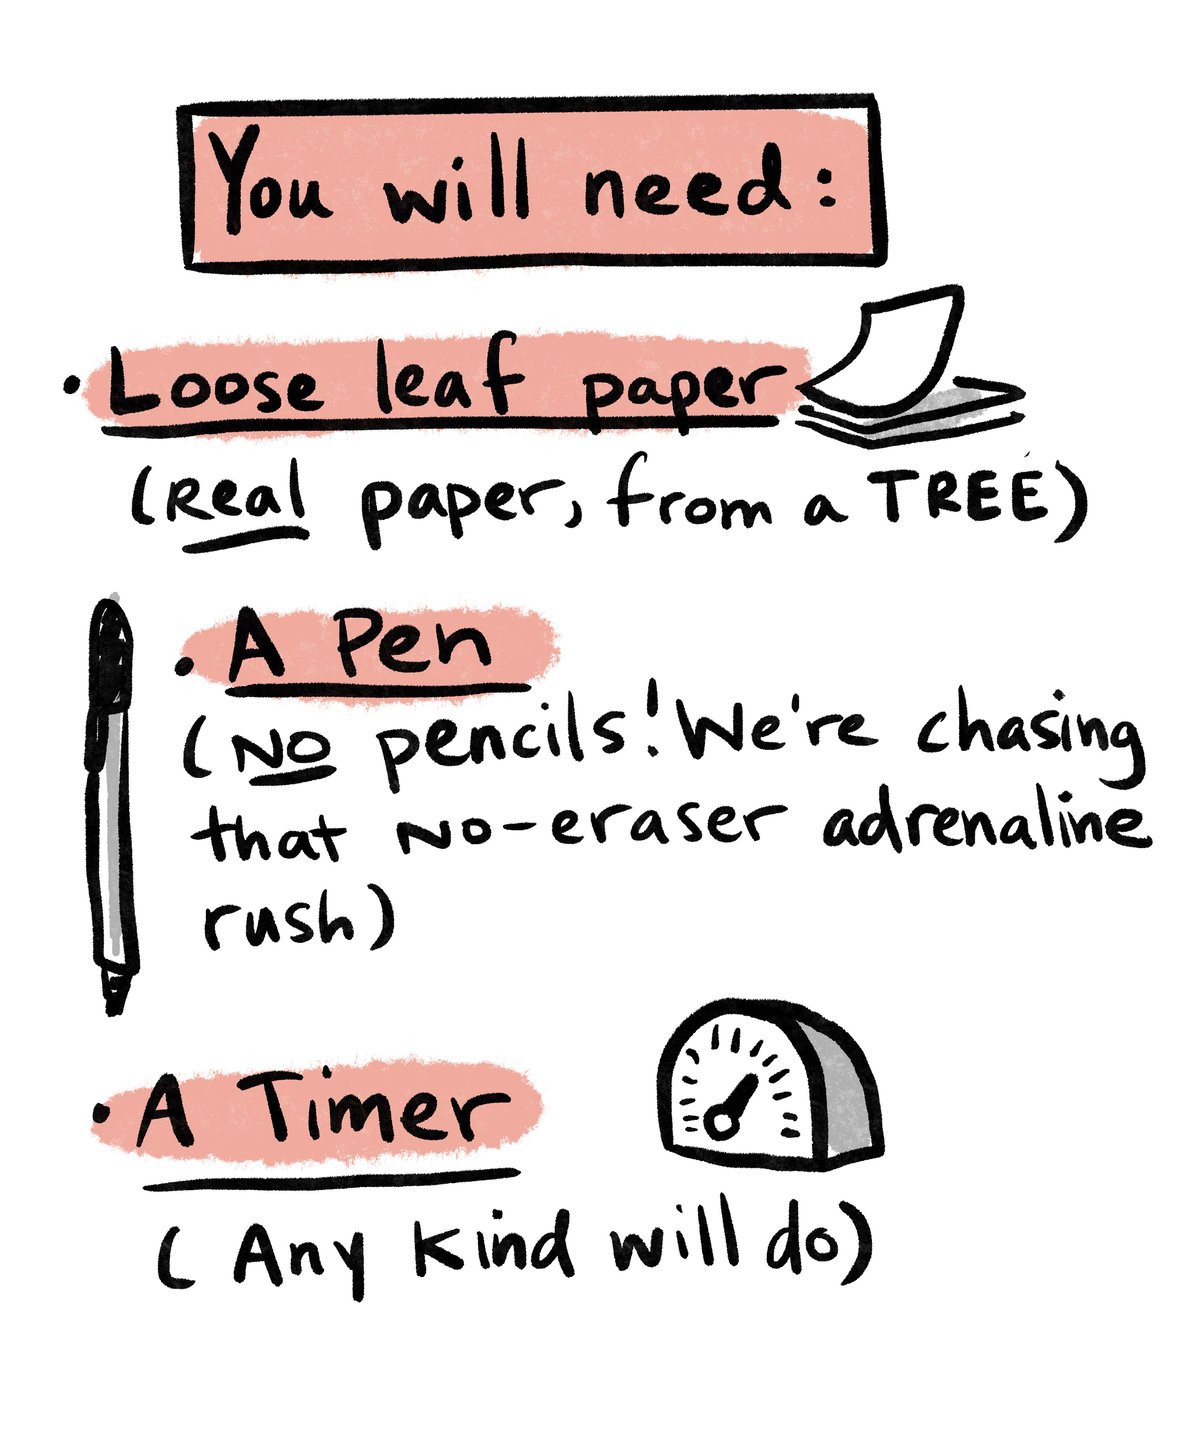 This is a sketch with a list of what you will need for the exercise. There is a drawing of paper, a pen, and a timer. The text reads, "You will need: Loose leaf paper (real paper, from a tree); a pen (no pencils! We're chasing that no-eraser adrenaline rush); a timer (any kind will do).